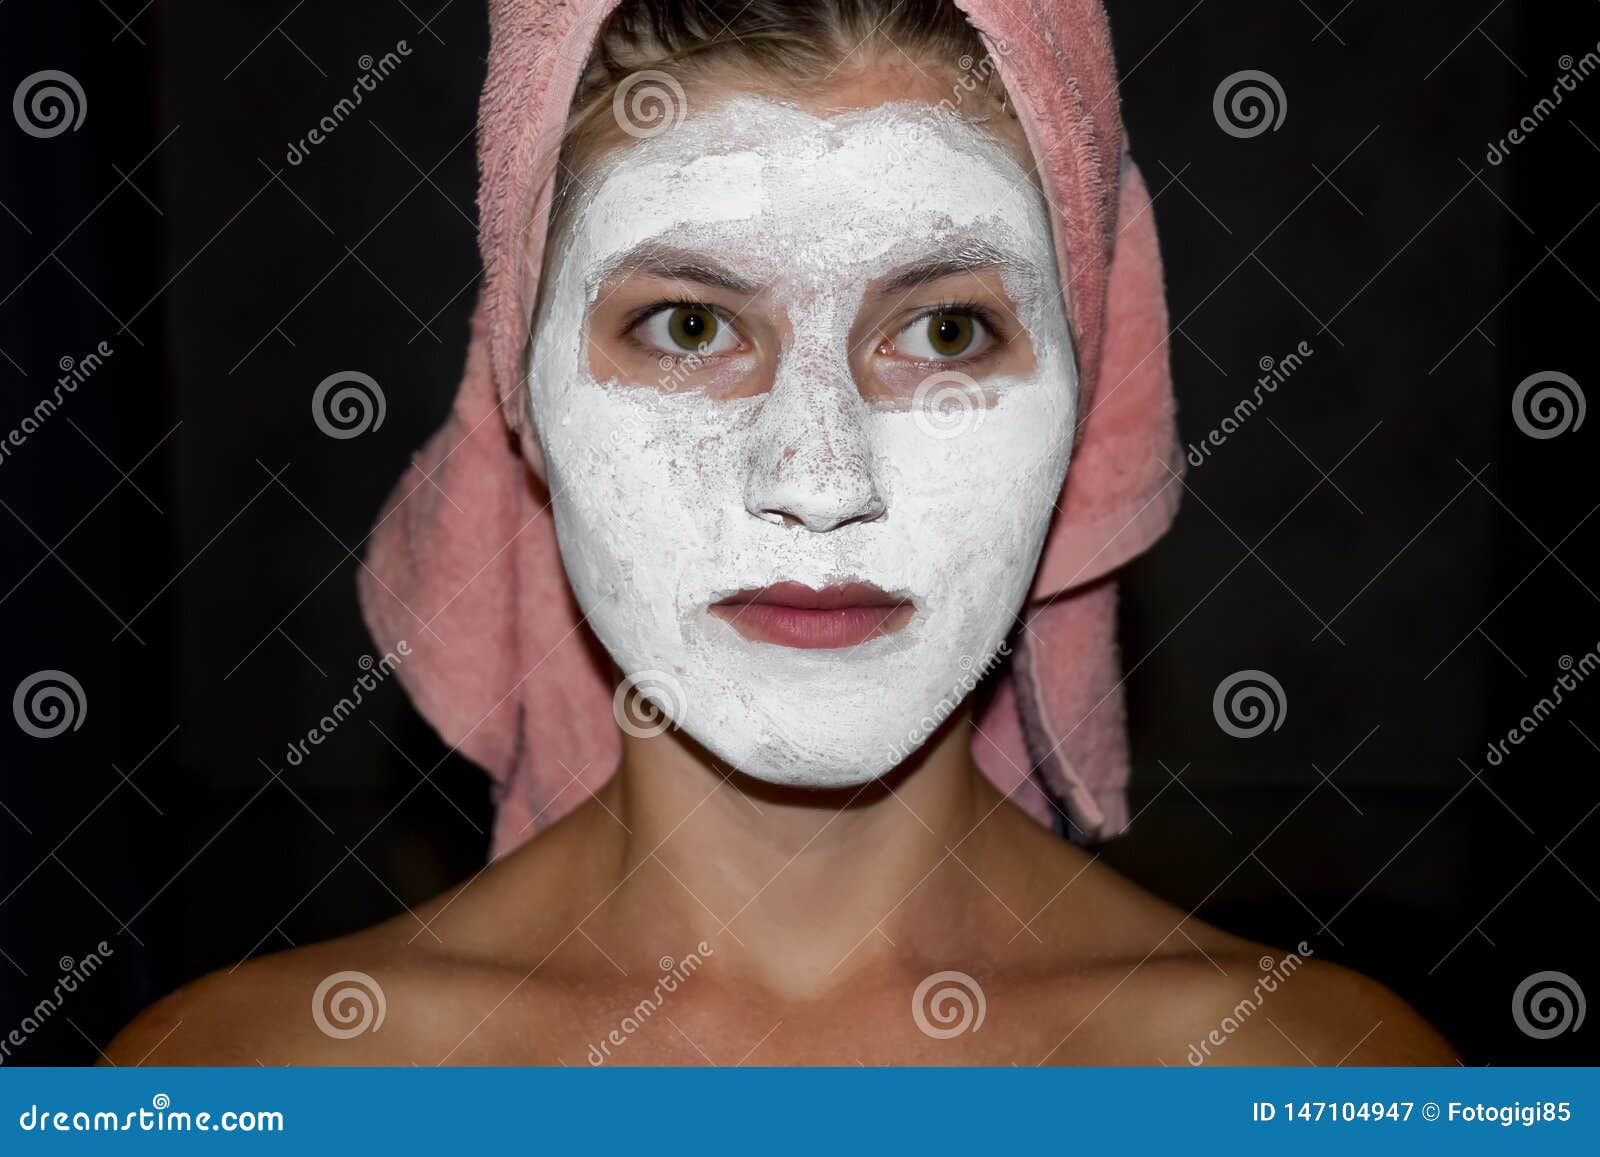 Blonde Hair and White Mask - wide 1